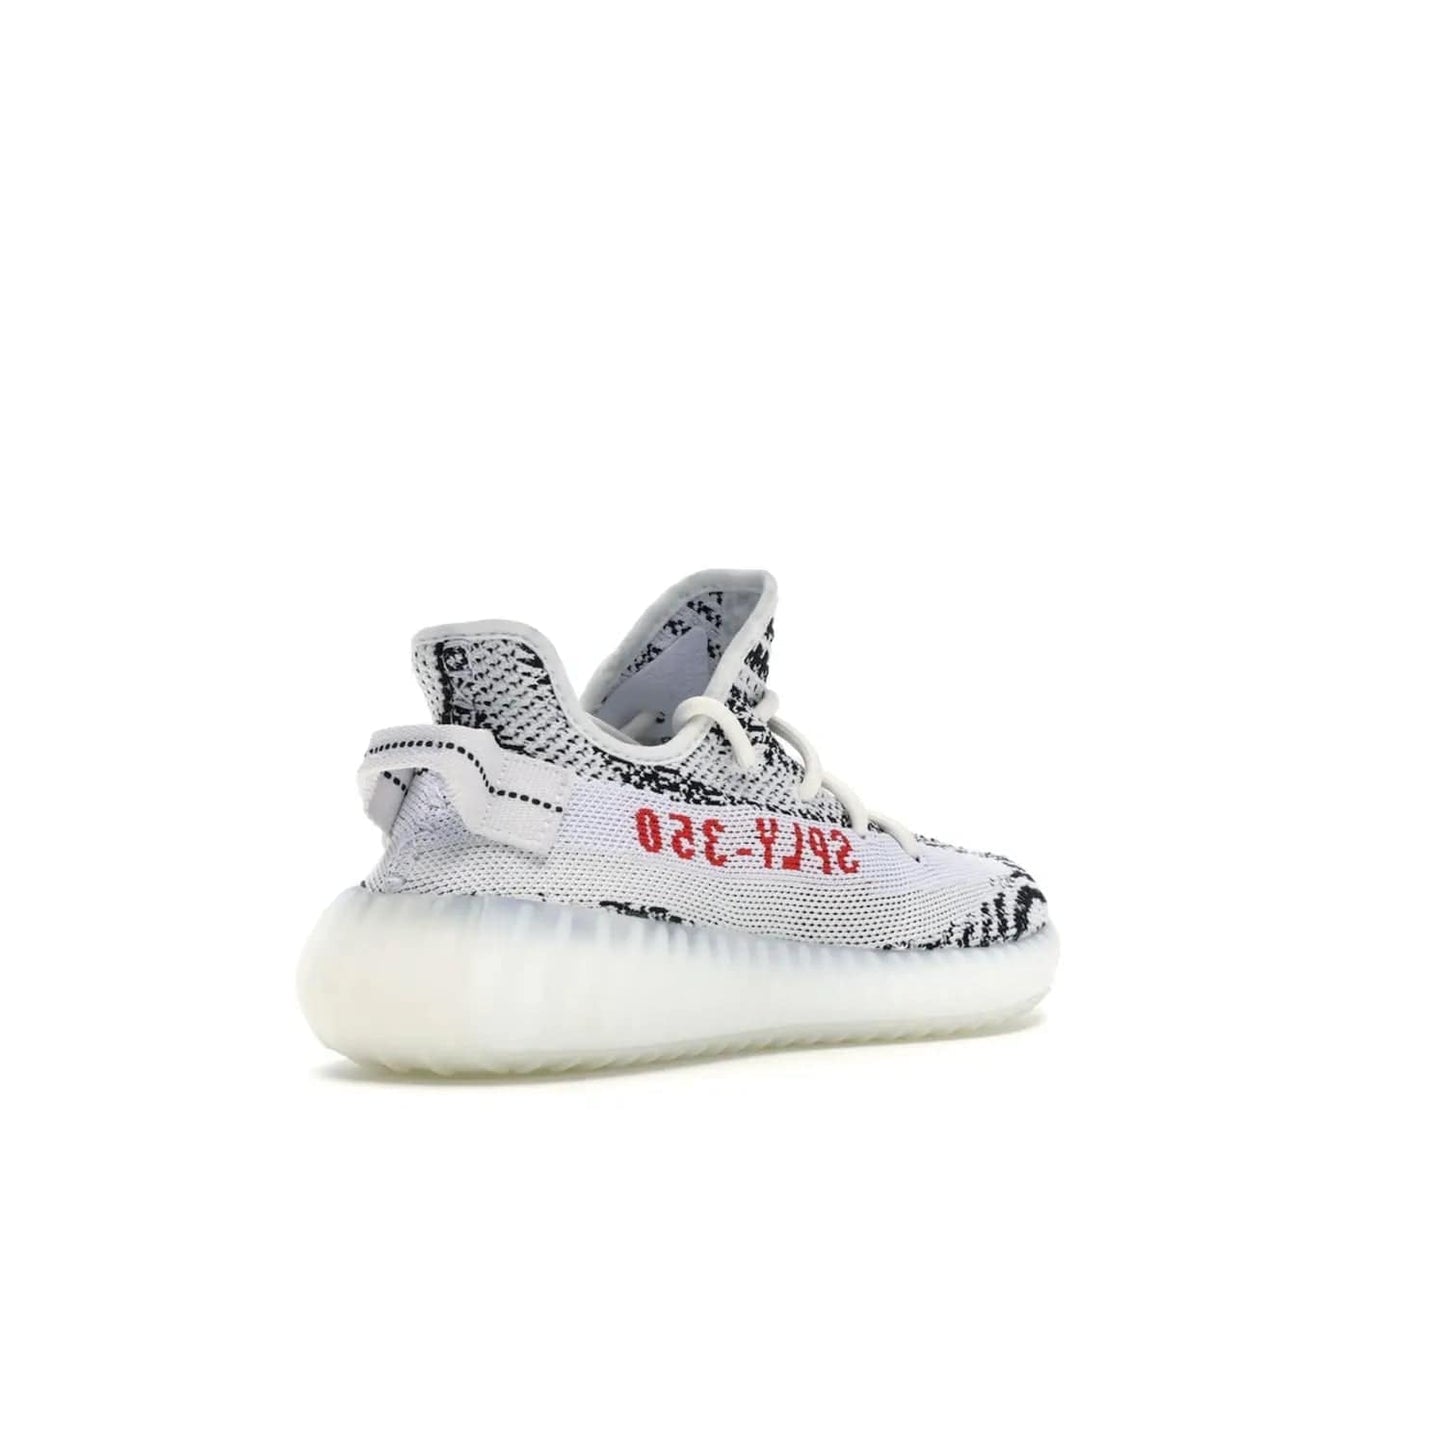 adidas Yeezy Boost 350 V2 Zebra - Image 32 - Only at www.BallersClubKickz.com - #
Score the iconic adidas Yeezy Boost 350 V2 Zebra for a fashionable addition to your street-style. Featuring a Primeknit upper and Boost sole, you'll look great and feel comfortable with every step.